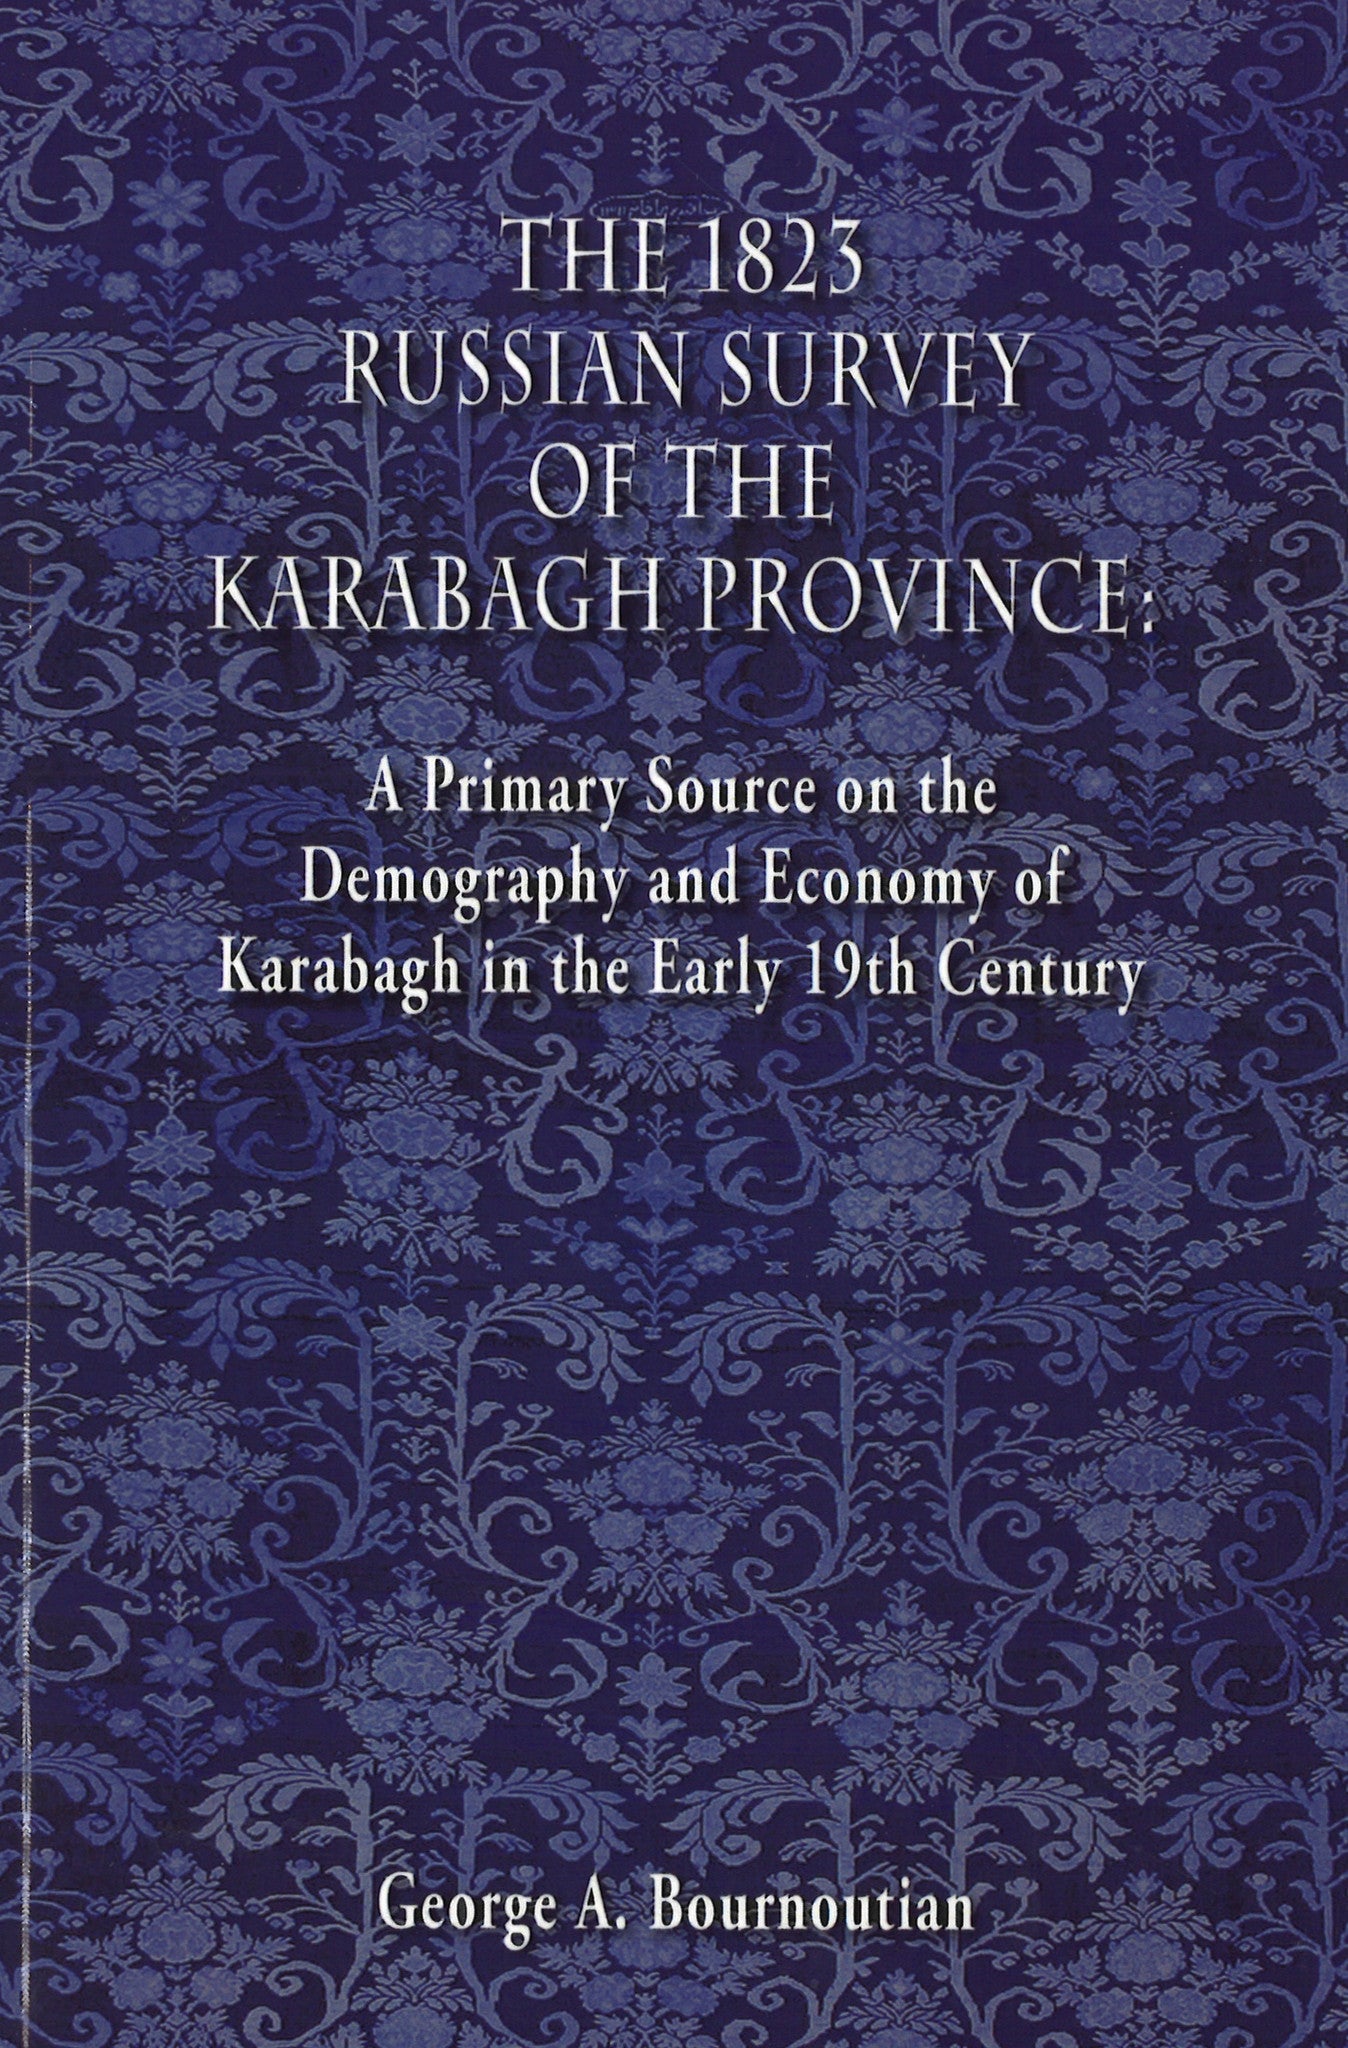 1823 RUSSIAN SURVEY OF THE KARABAGH PROVINCE